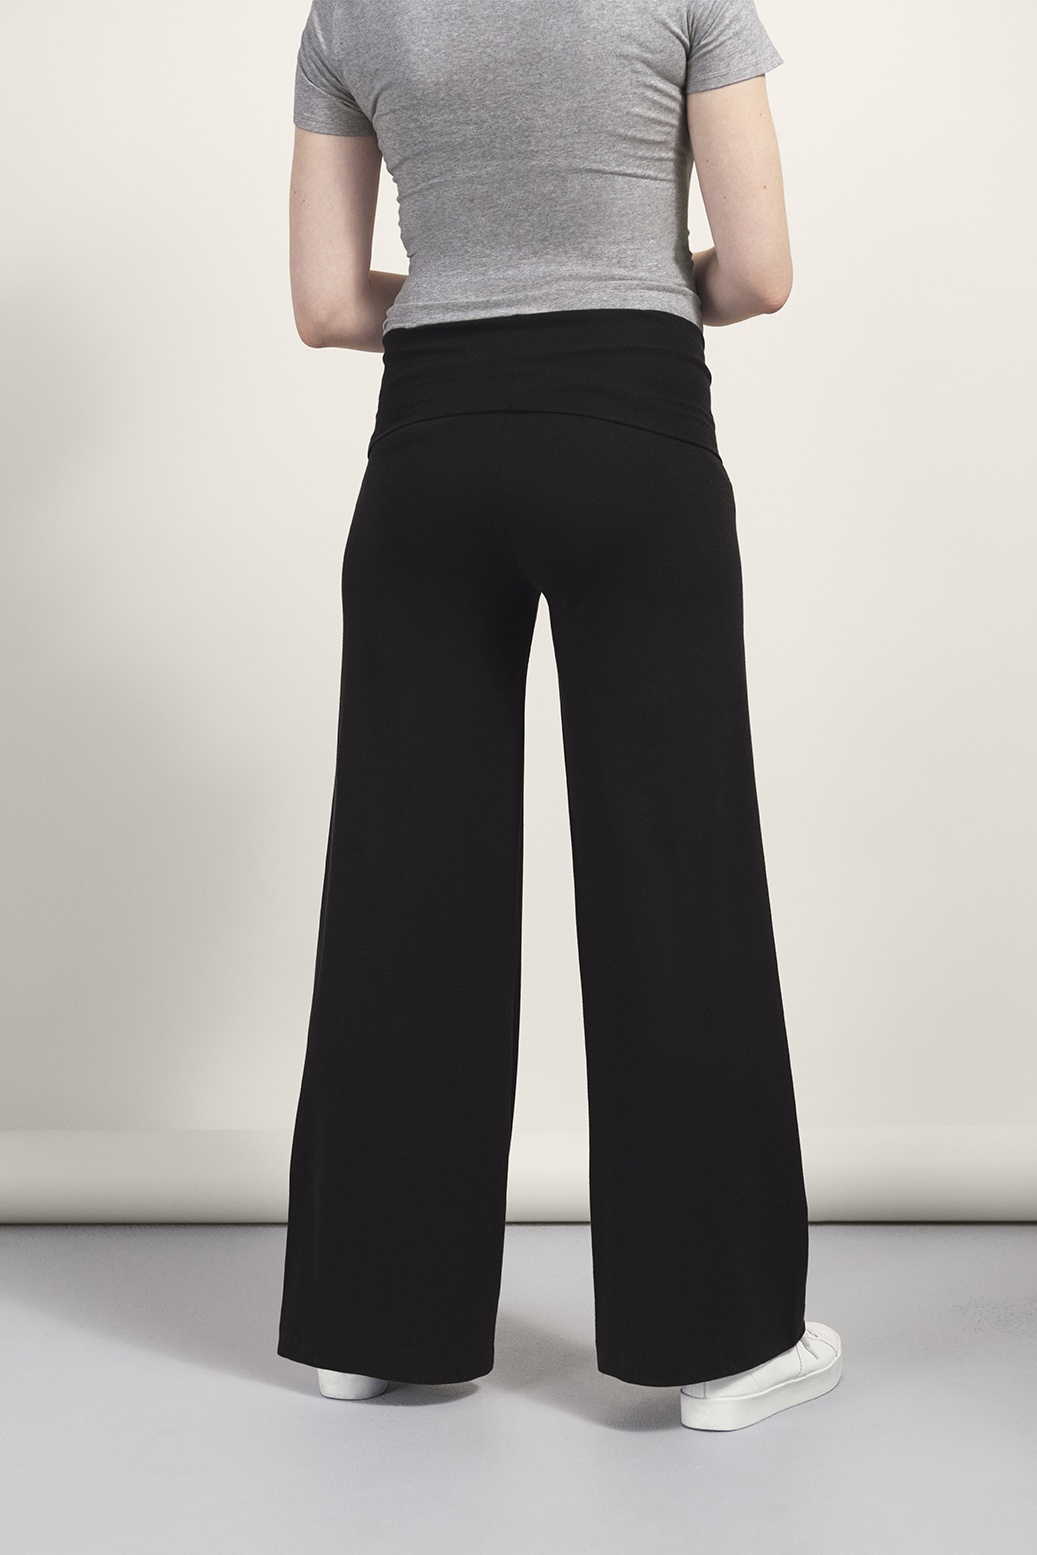 Wide Leg Maternity Pants (Once-On-Never-Off) (X-Small ONLY) - hautemama